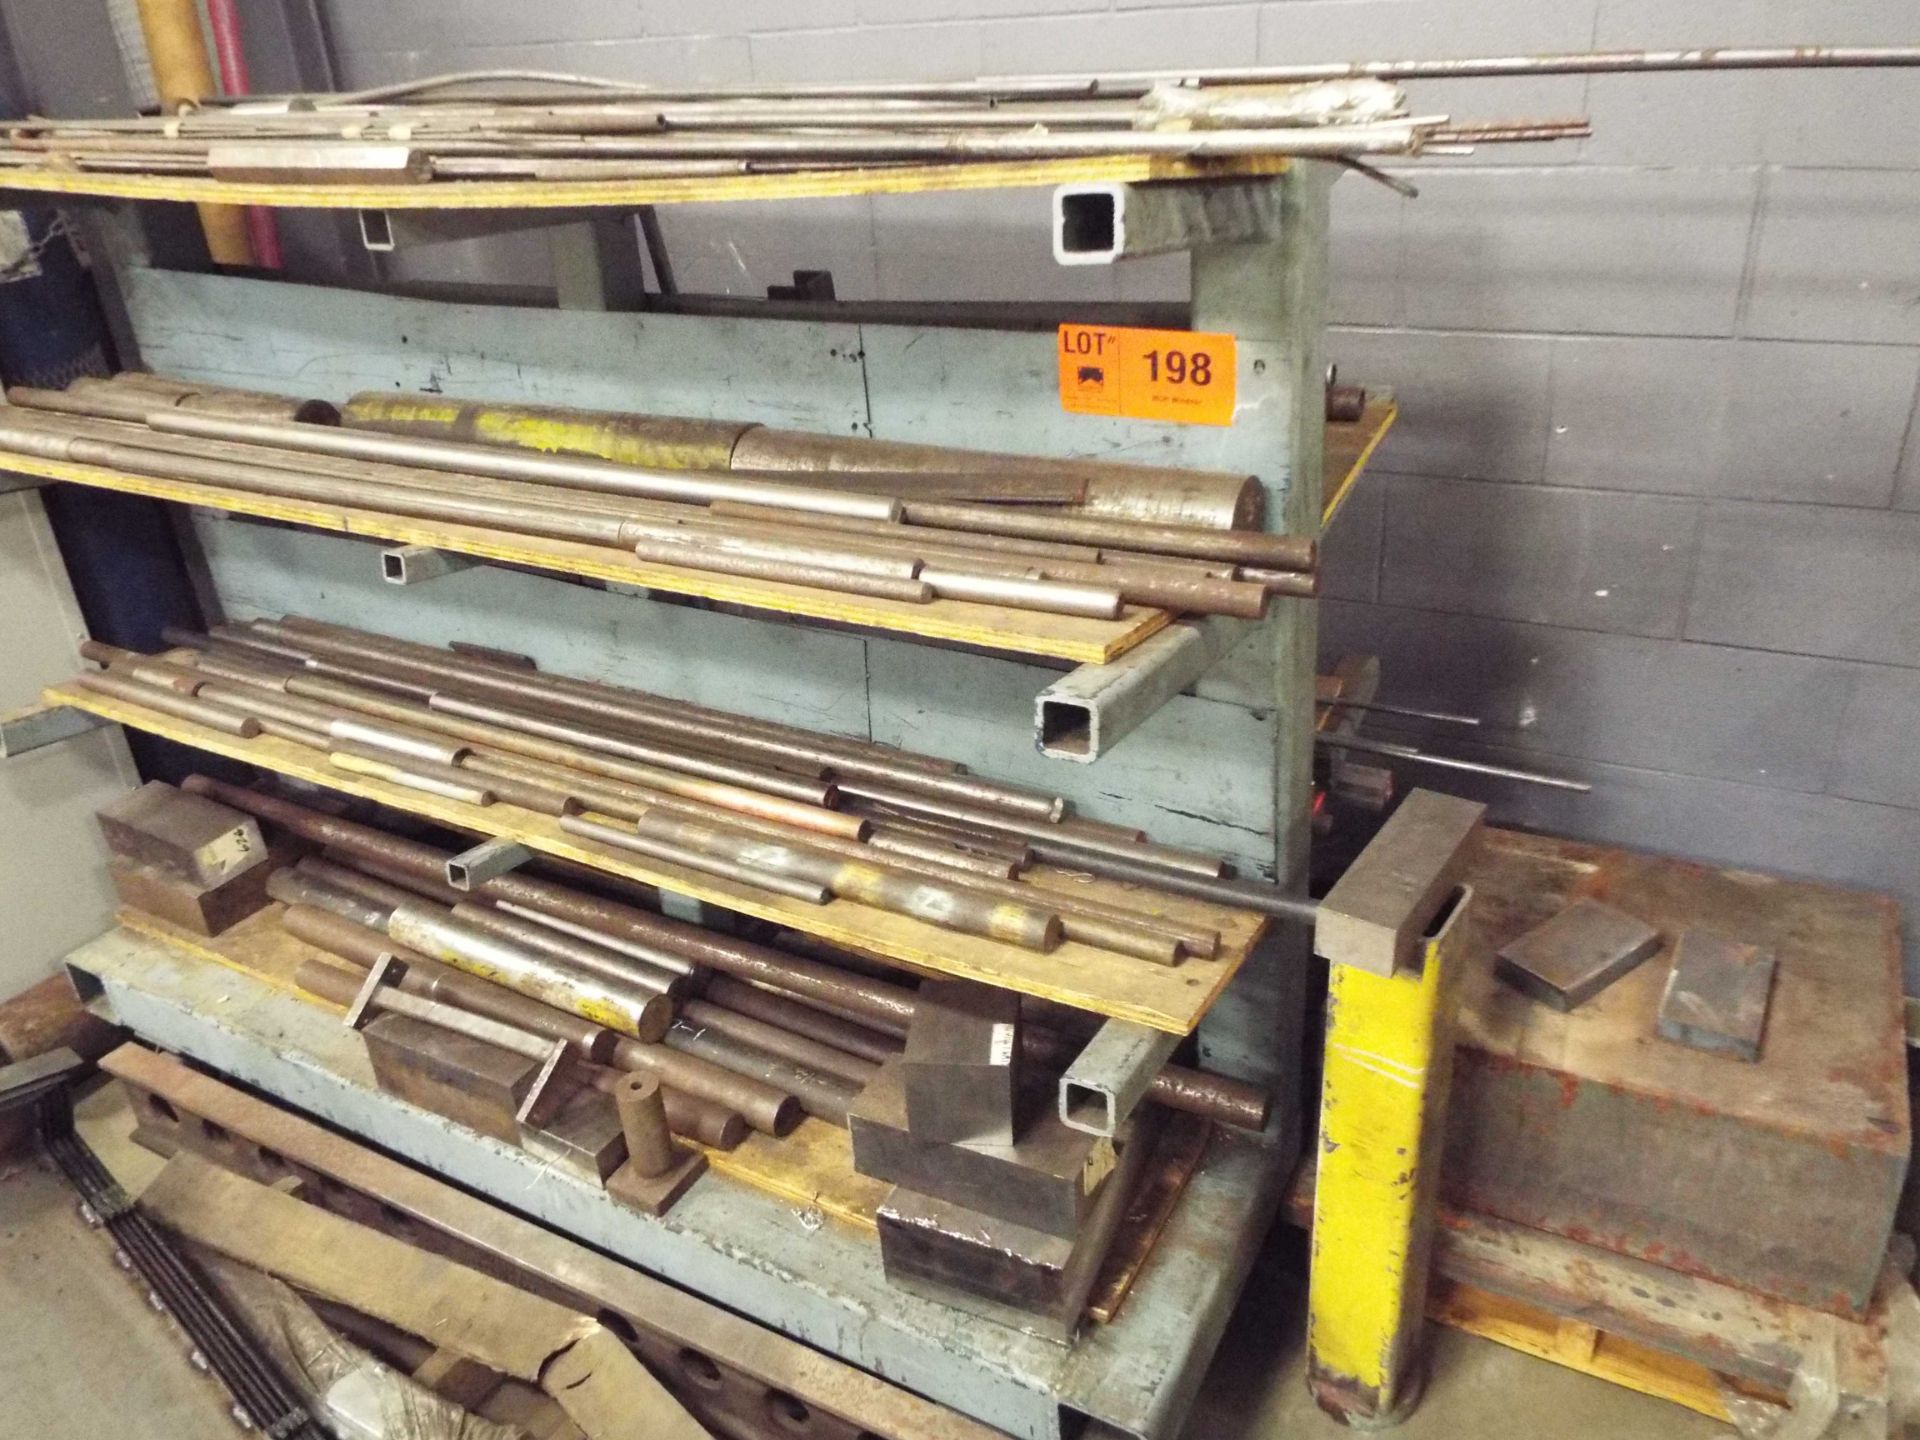 LOT/ MATERIAL RACK WITH SURPLUS MATERIALS